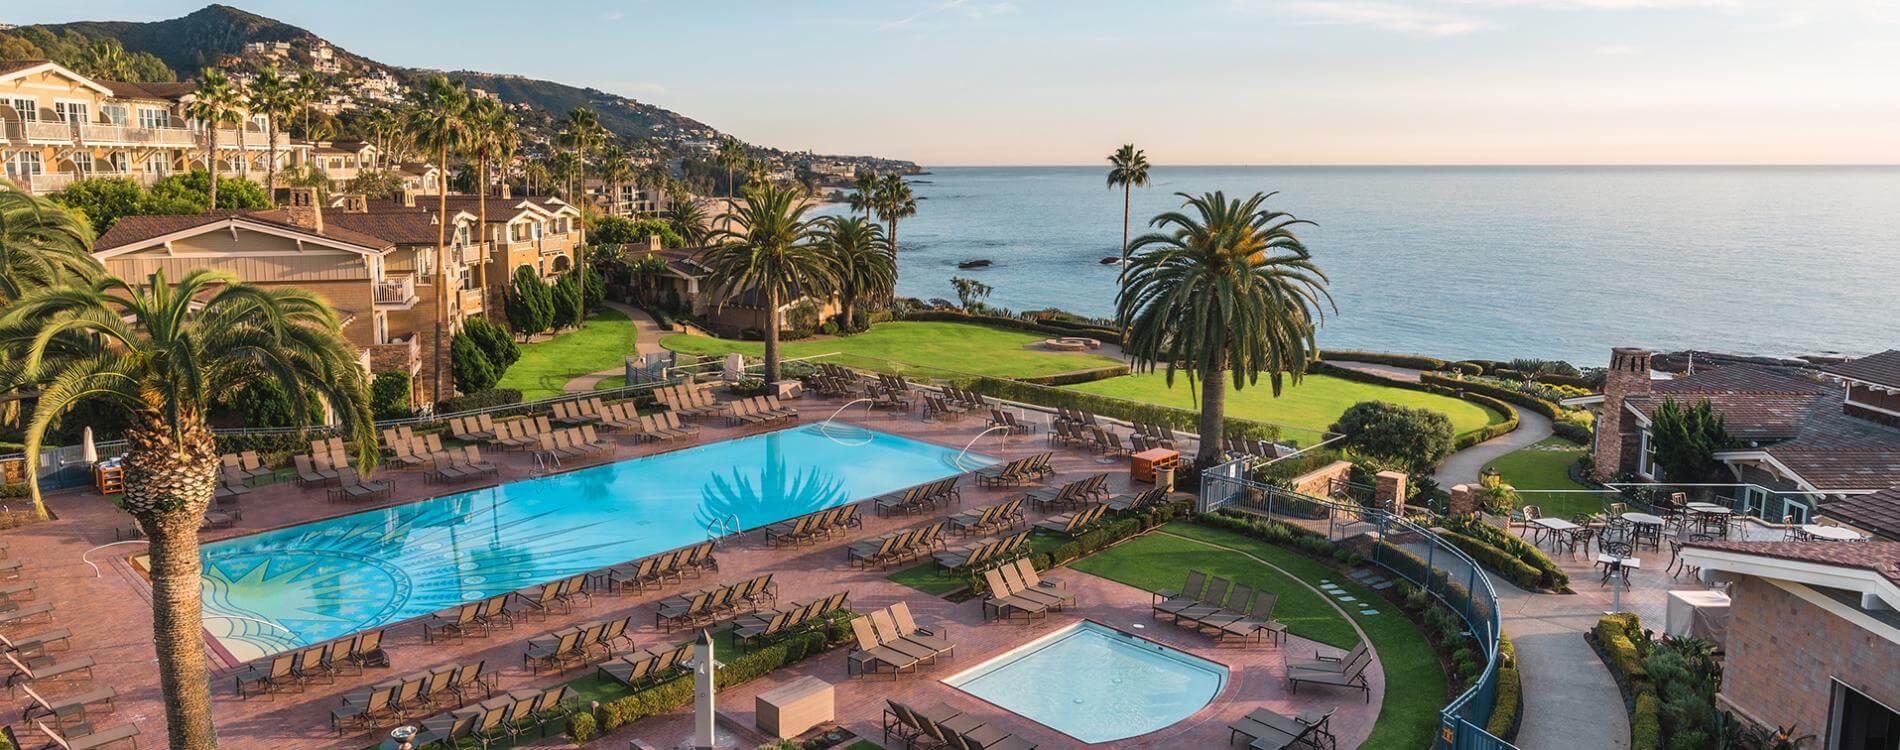 Hosts Global | Discover luxurious accommodations in Southern California 